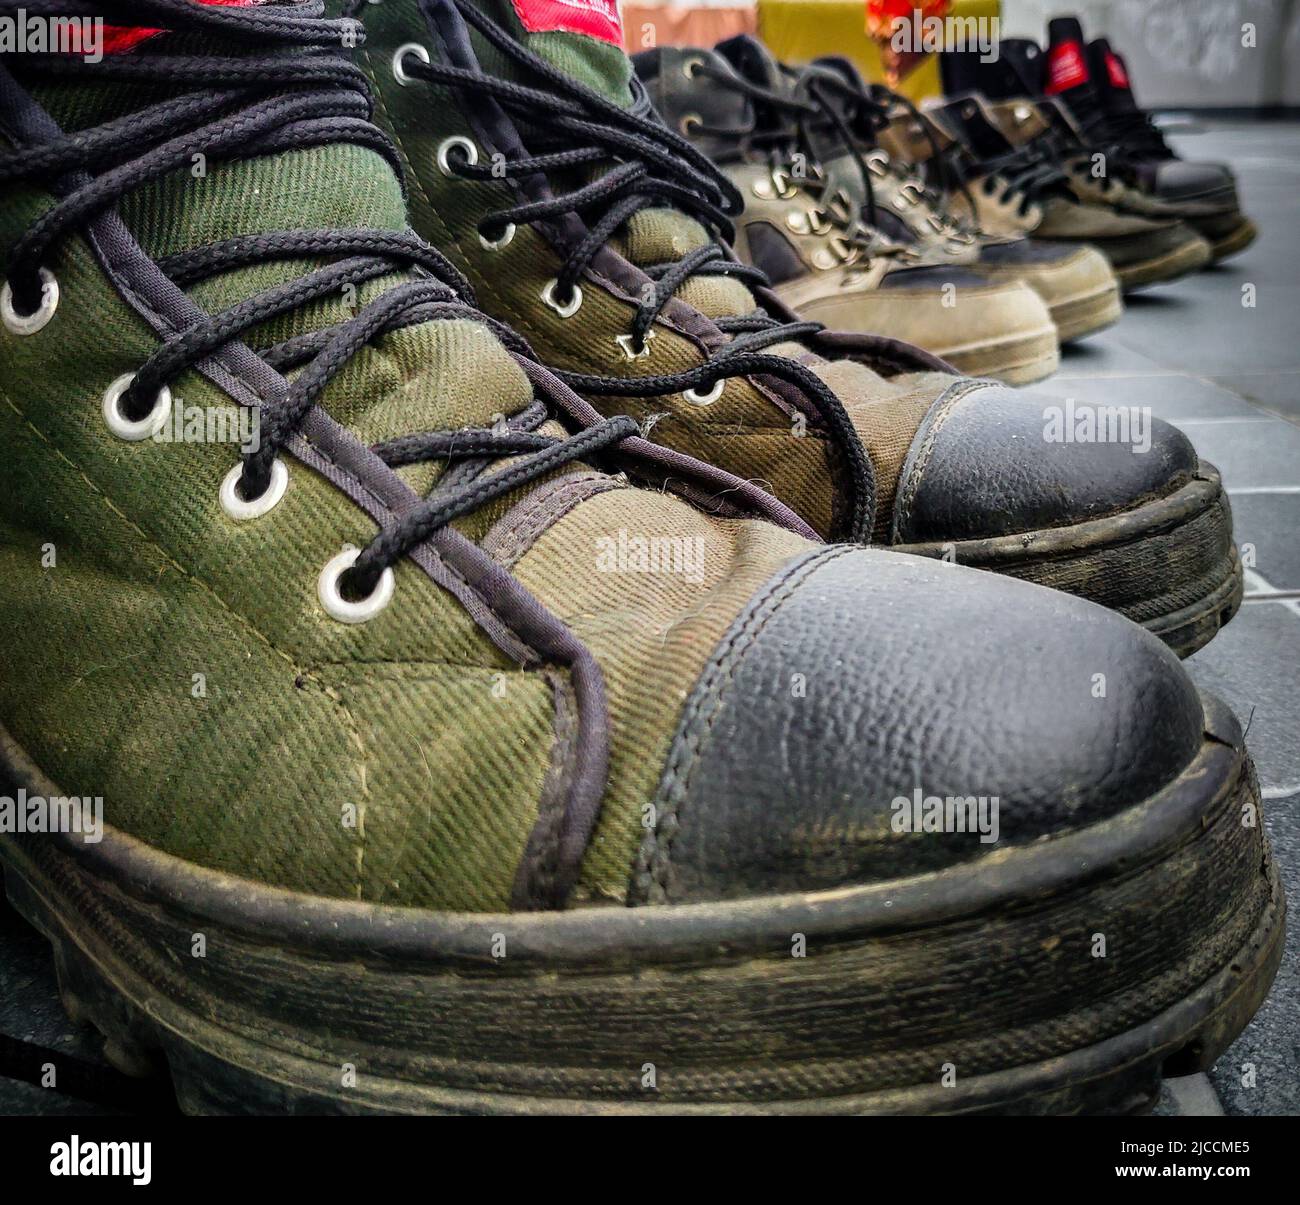 a close up shot of army training boot, shoes lined up after a run. Uttarakhand India. Stock Photo